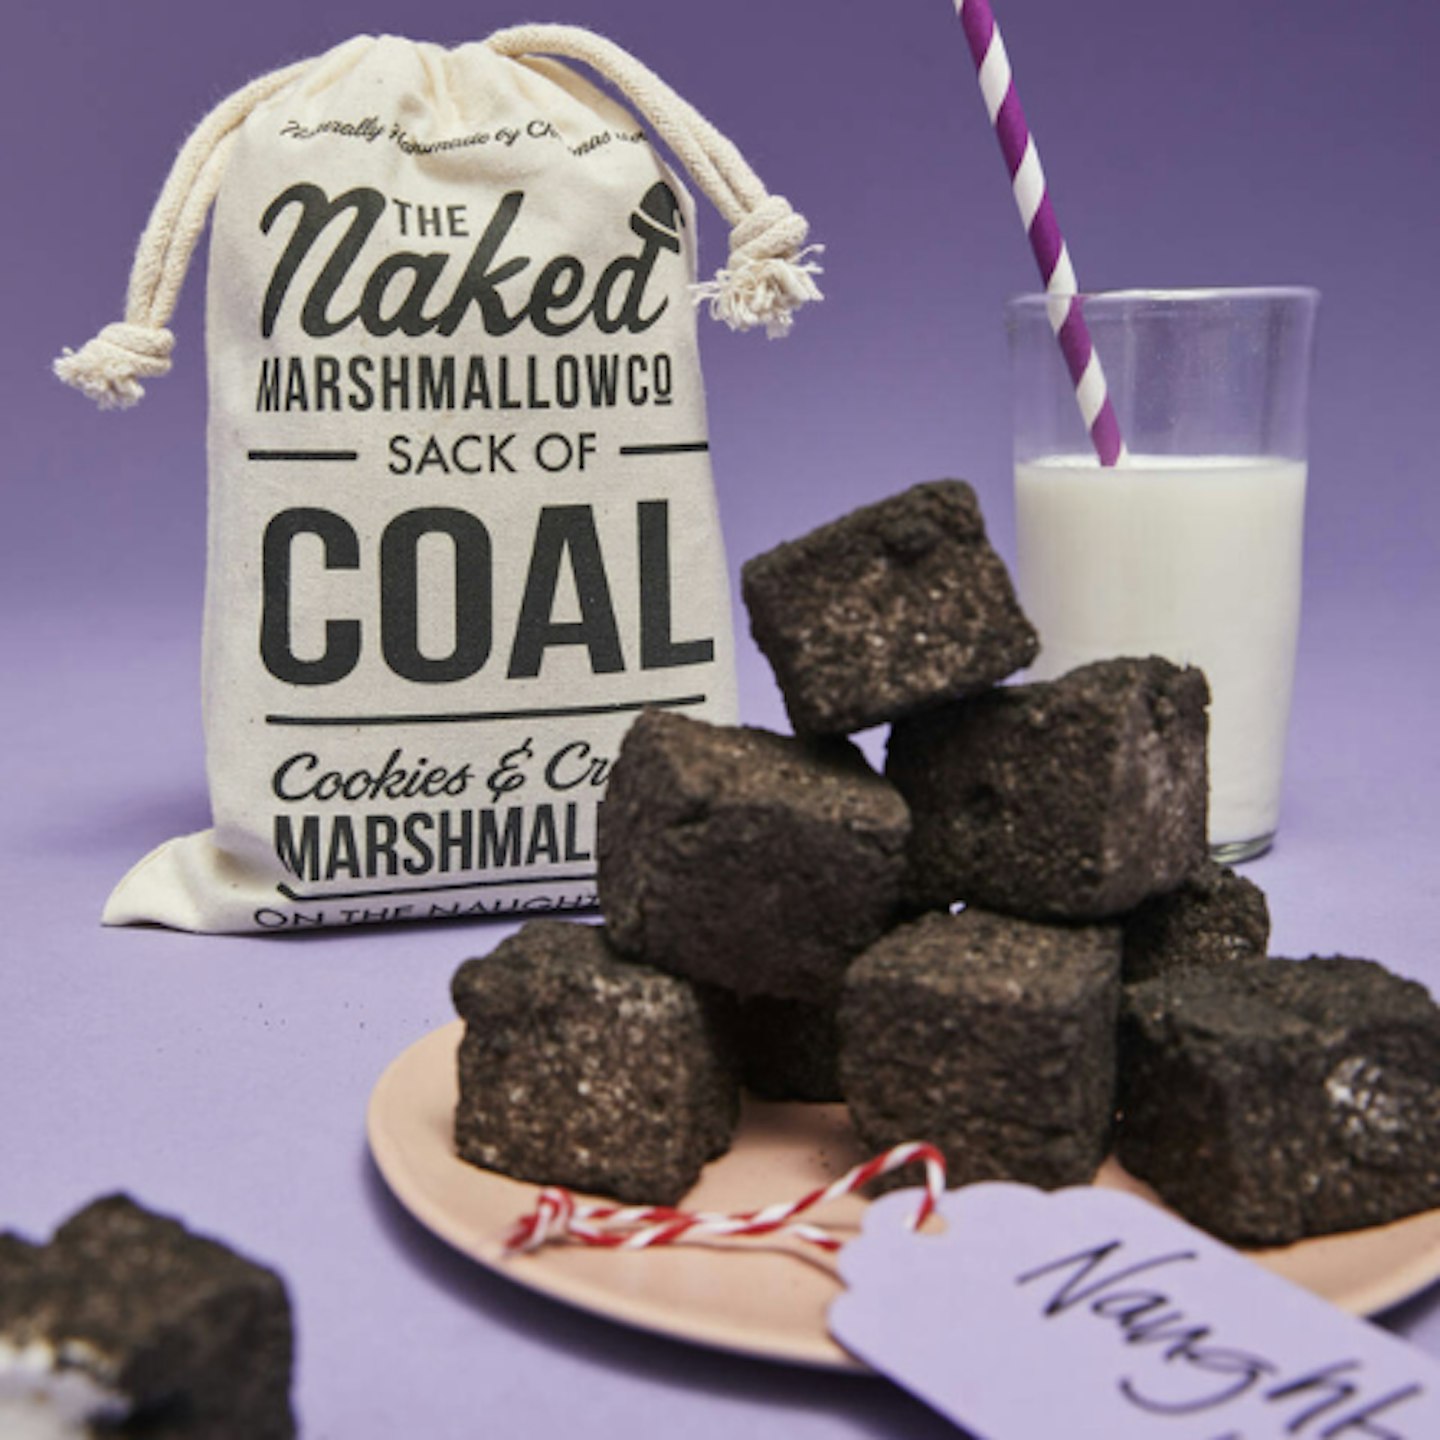 The Naked Marshmallow Co Sack of Coal